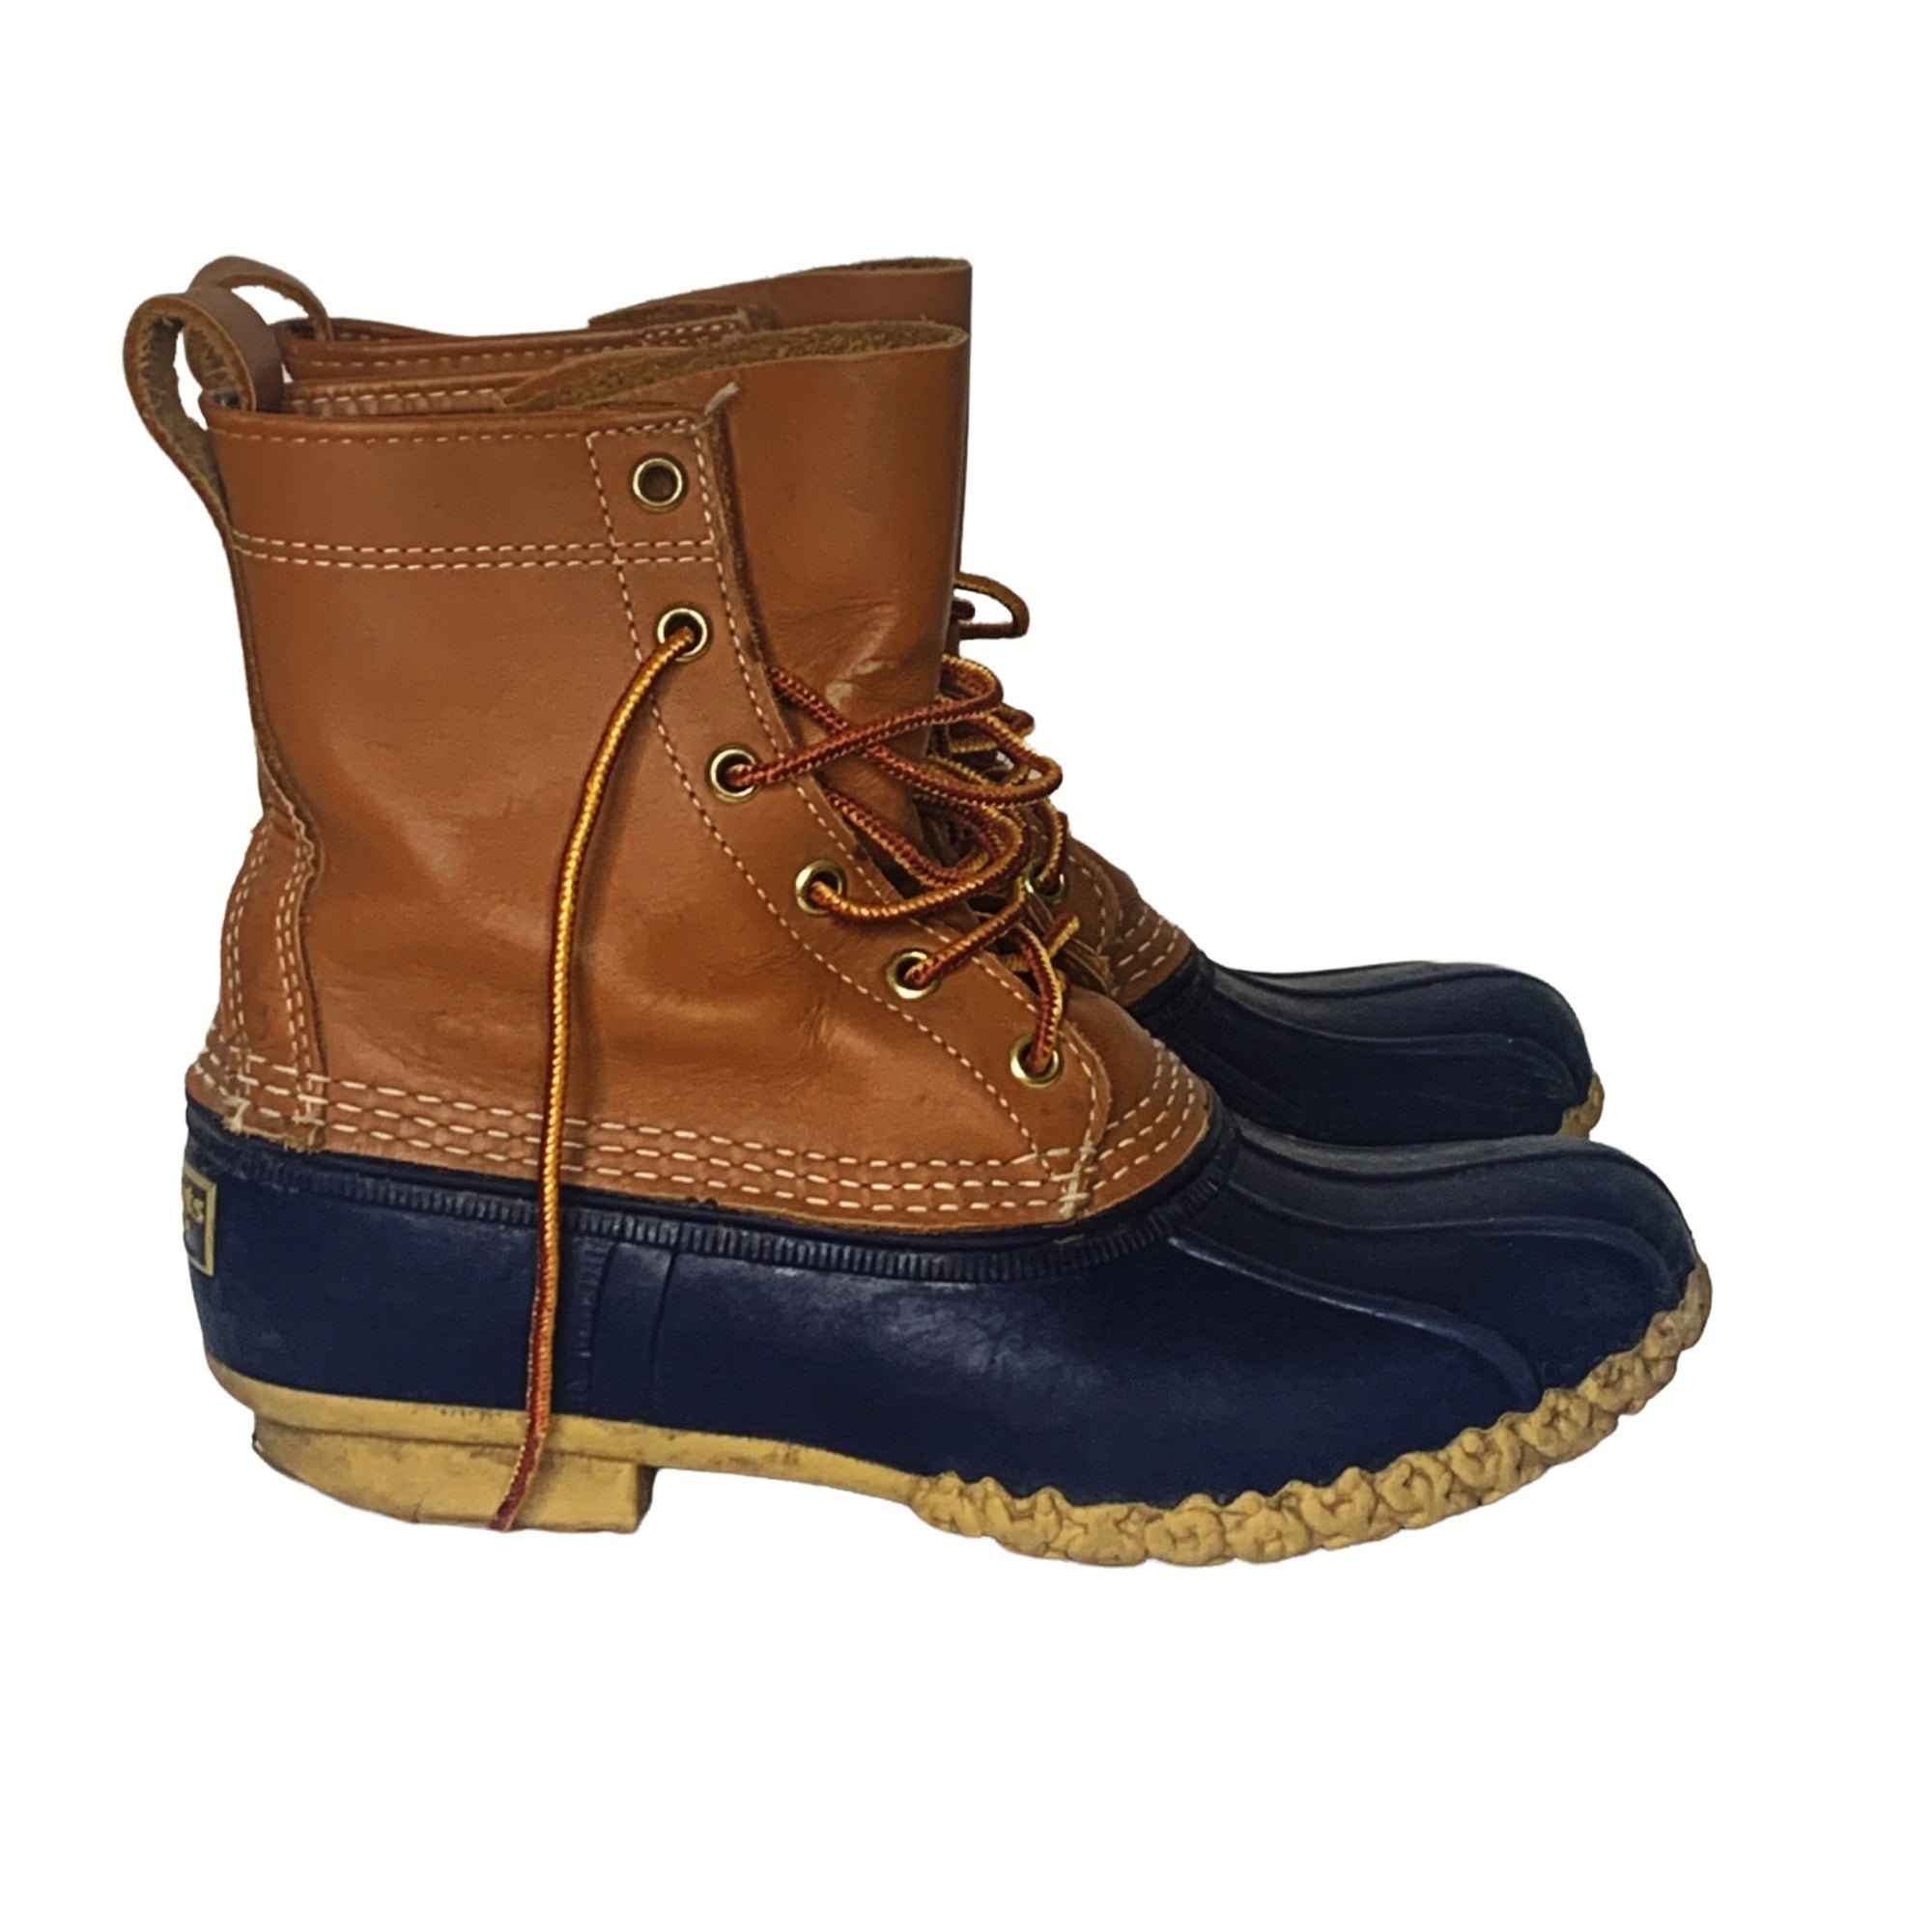 80's L.L.Bean rubber boots steel shank 最新人気 - 長靴